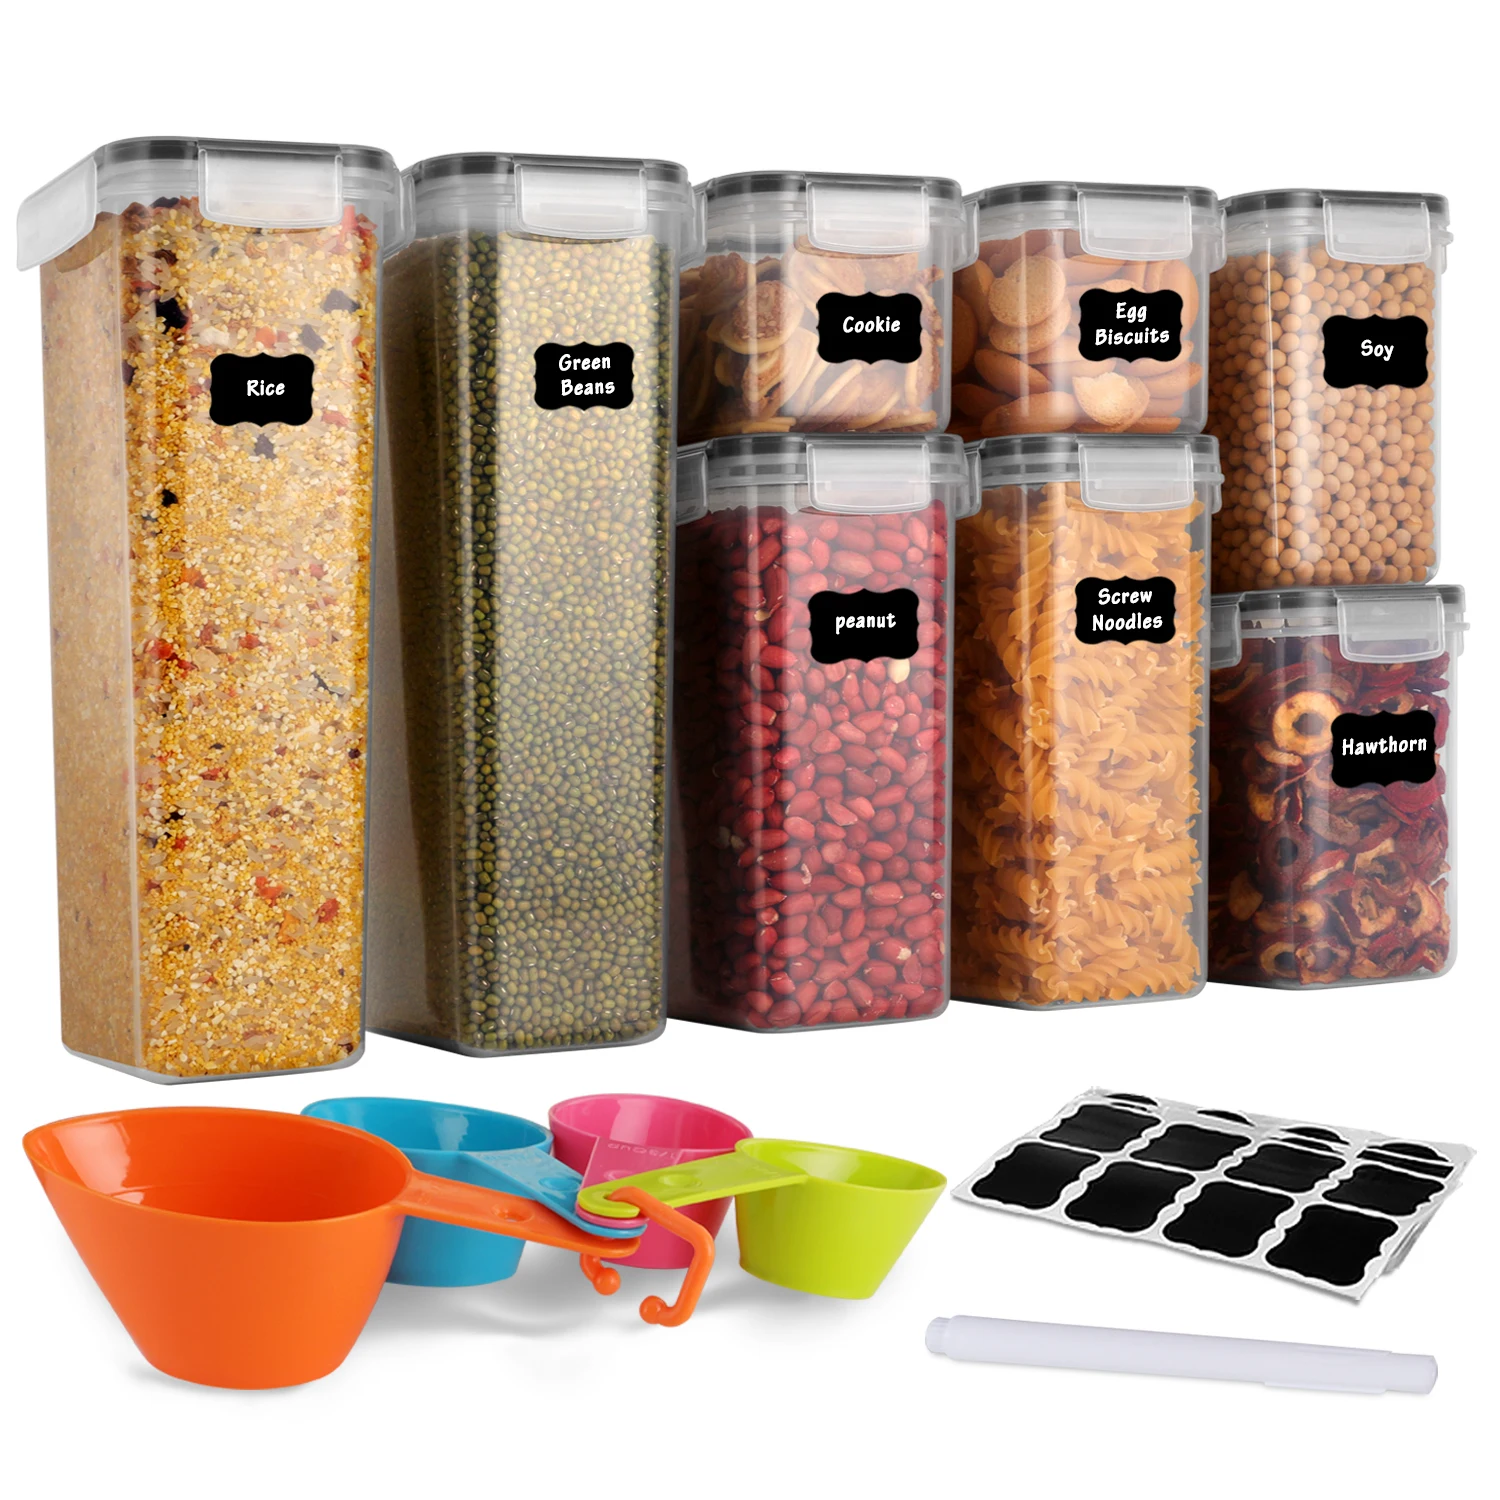 https://ae01.alicdn.com/kf/H081ae66e5bf94d4e89760d184afd33c7v/GoMaihe-8-10-Pieces-Food-Container-Kitchen-Storage-Cereal-Dispenser-for-Storing-Pasta-and-Tea-Coffee.jpg